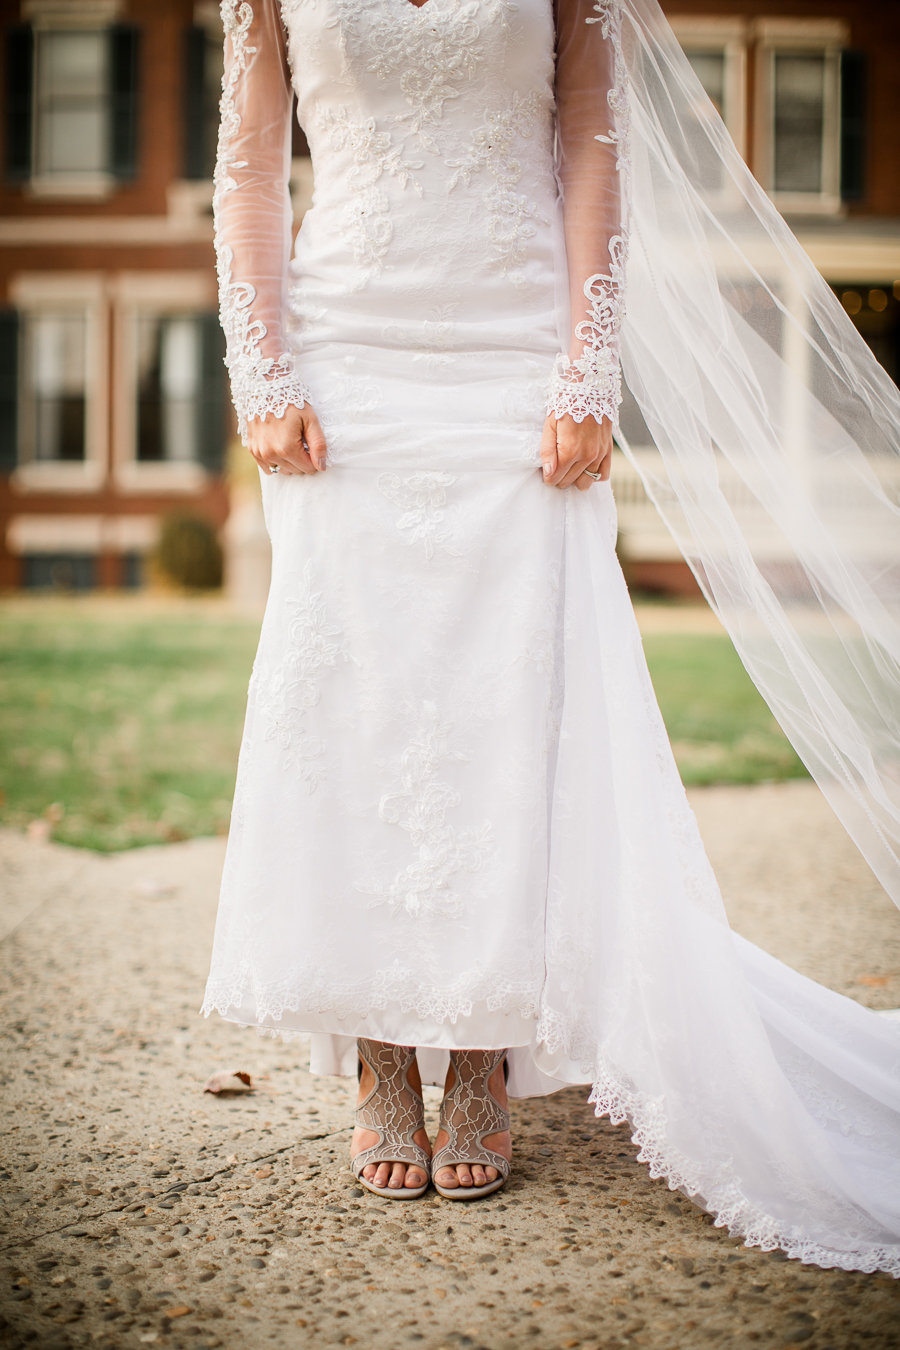 Showing off her shoes at Historic Westwood by Knoxville Wedding Photographer, Amanda May Photos.